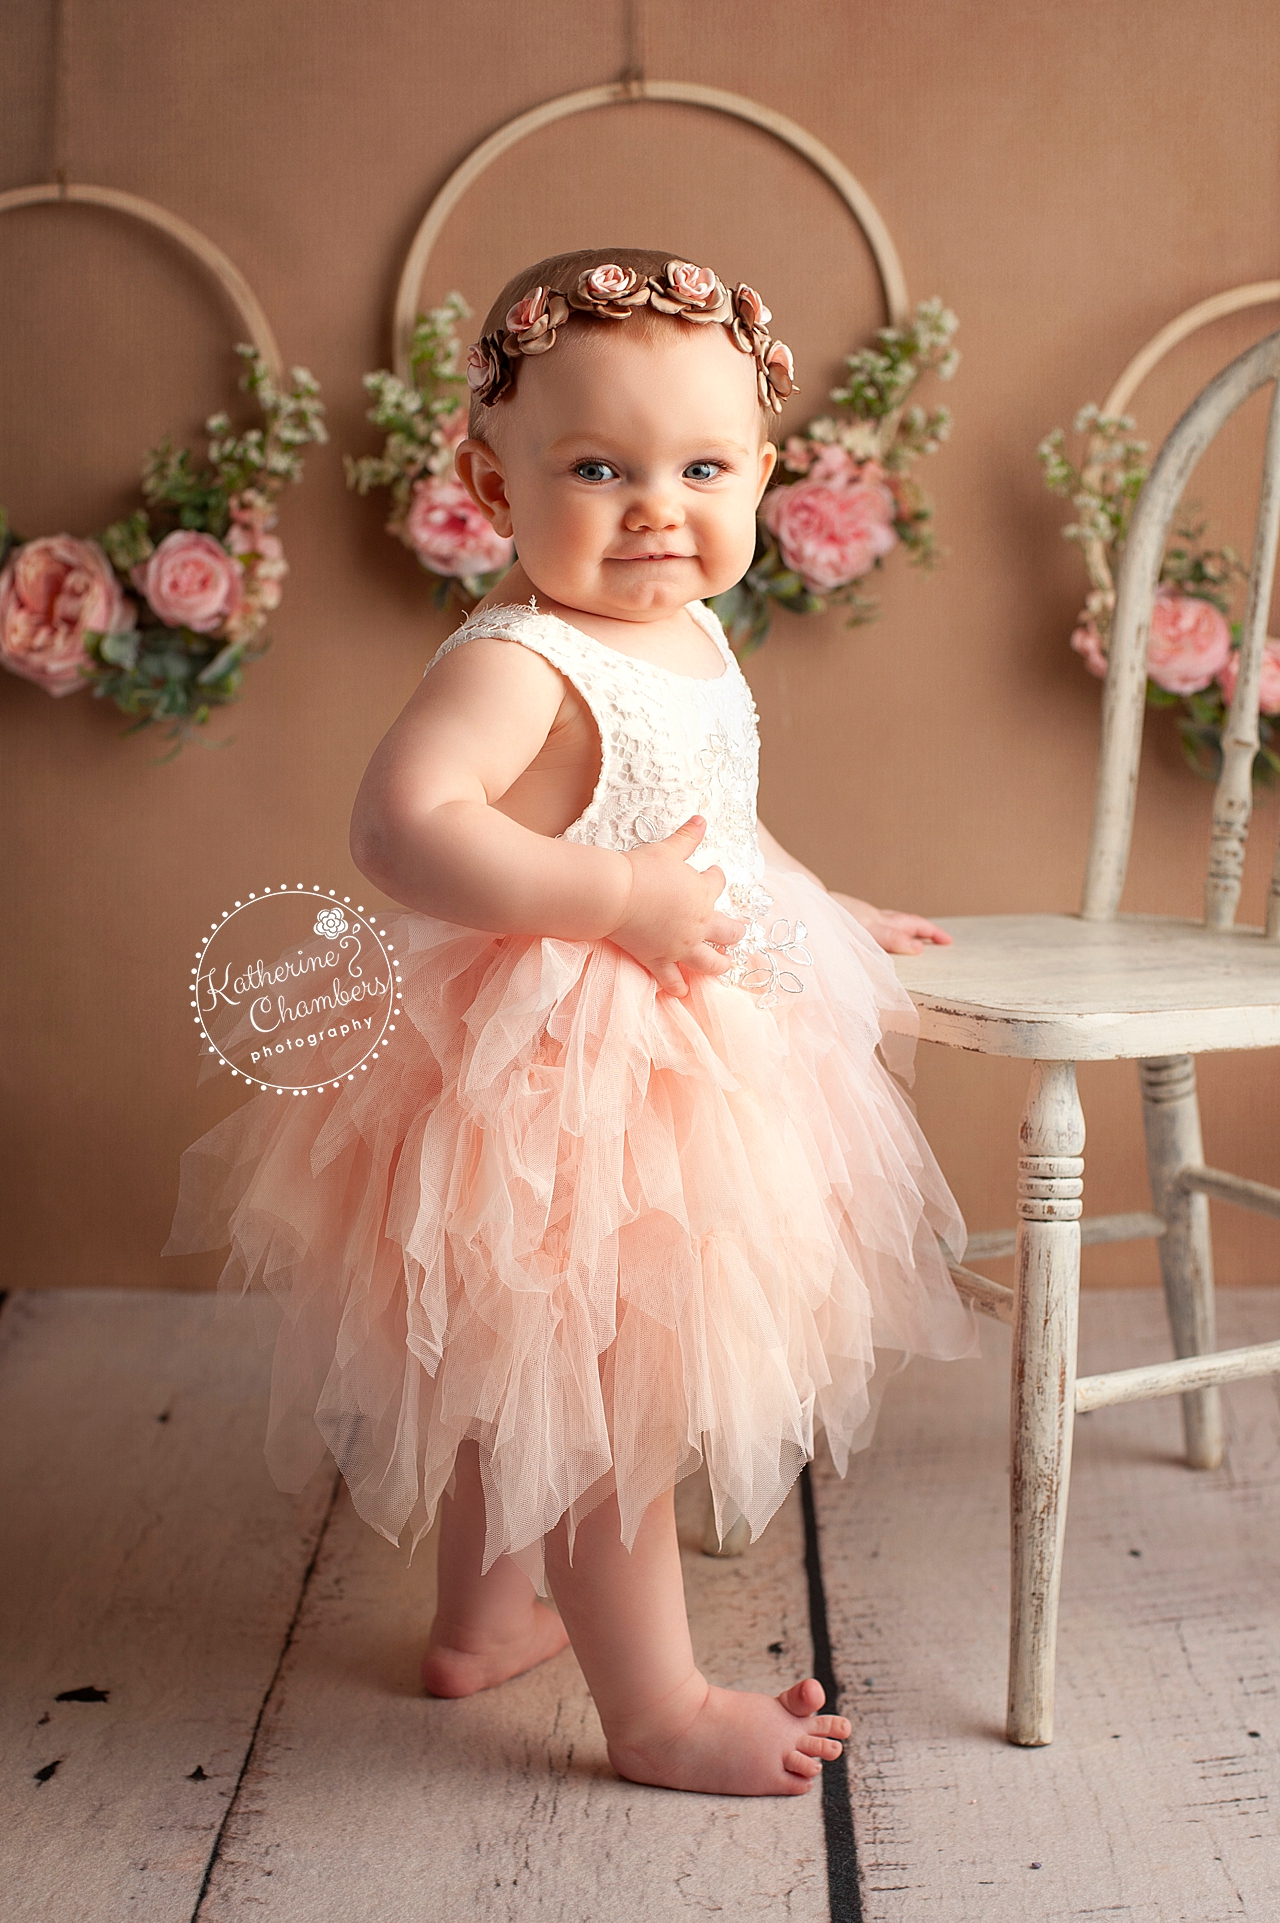 One Year Session | Baby Photographer